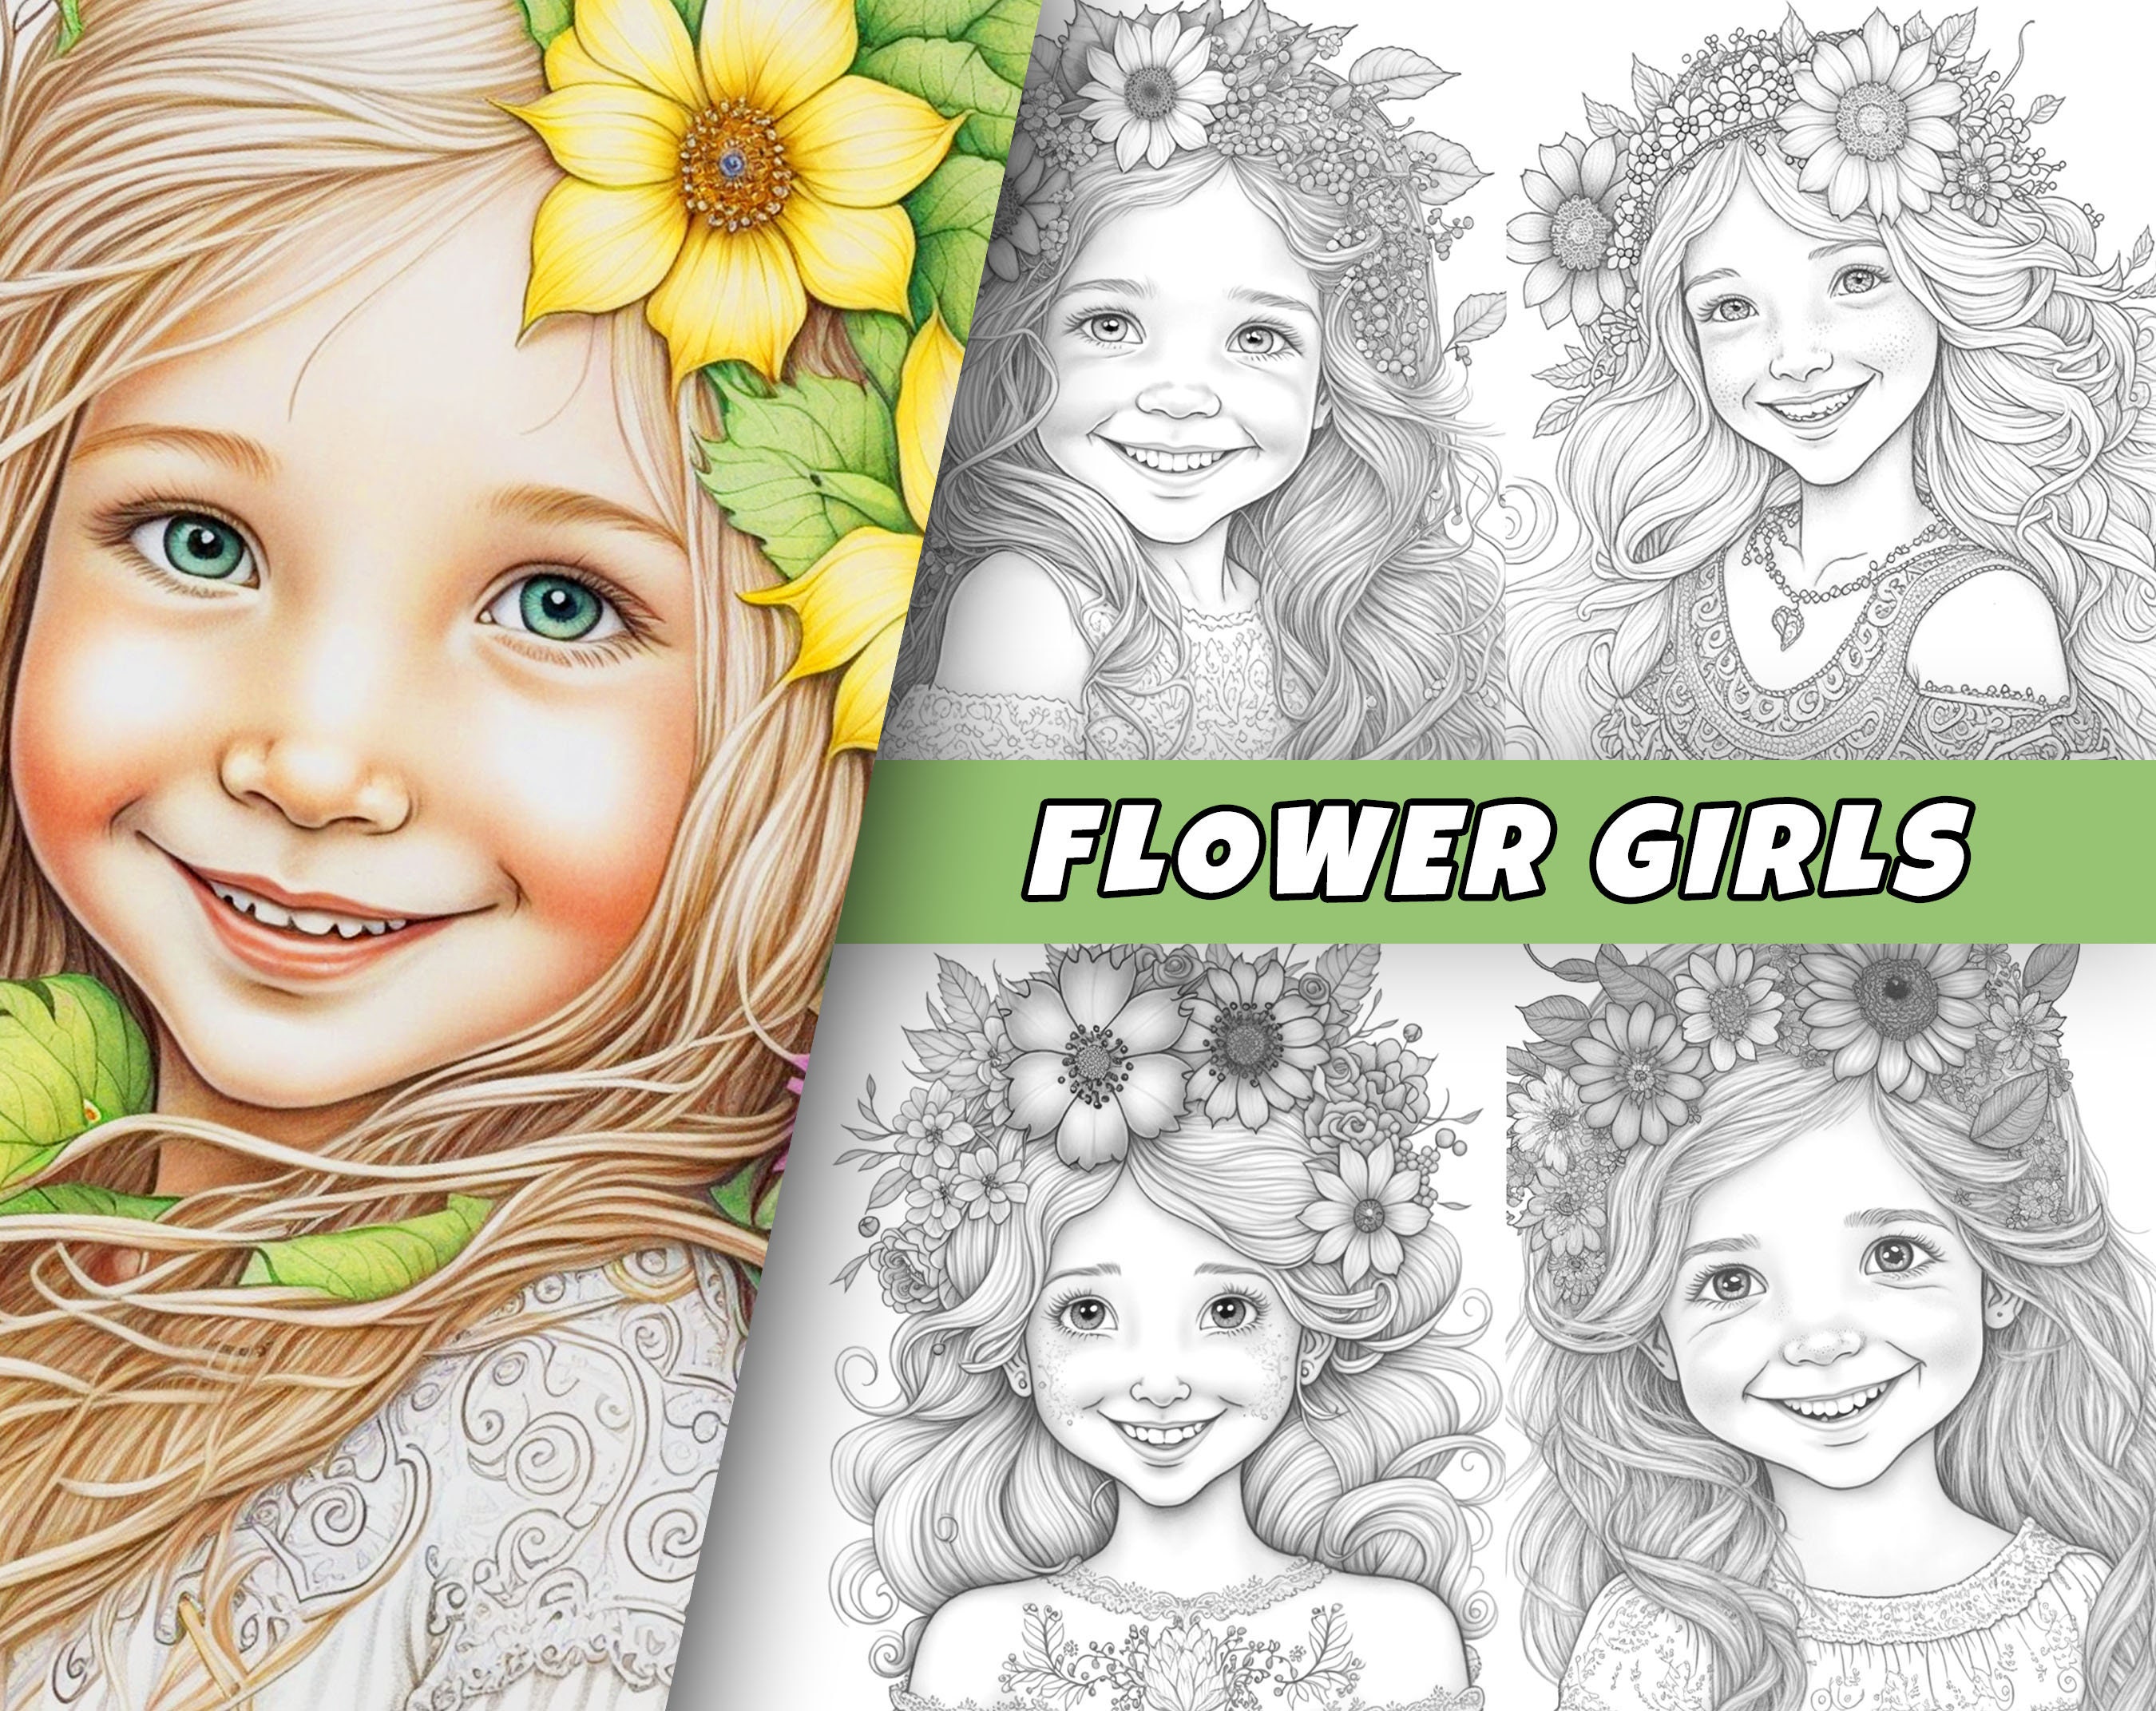 Bride - Wedding Coloring And Activity Book For Kids: For Girls Ages 4+,  Book For Flower Girl